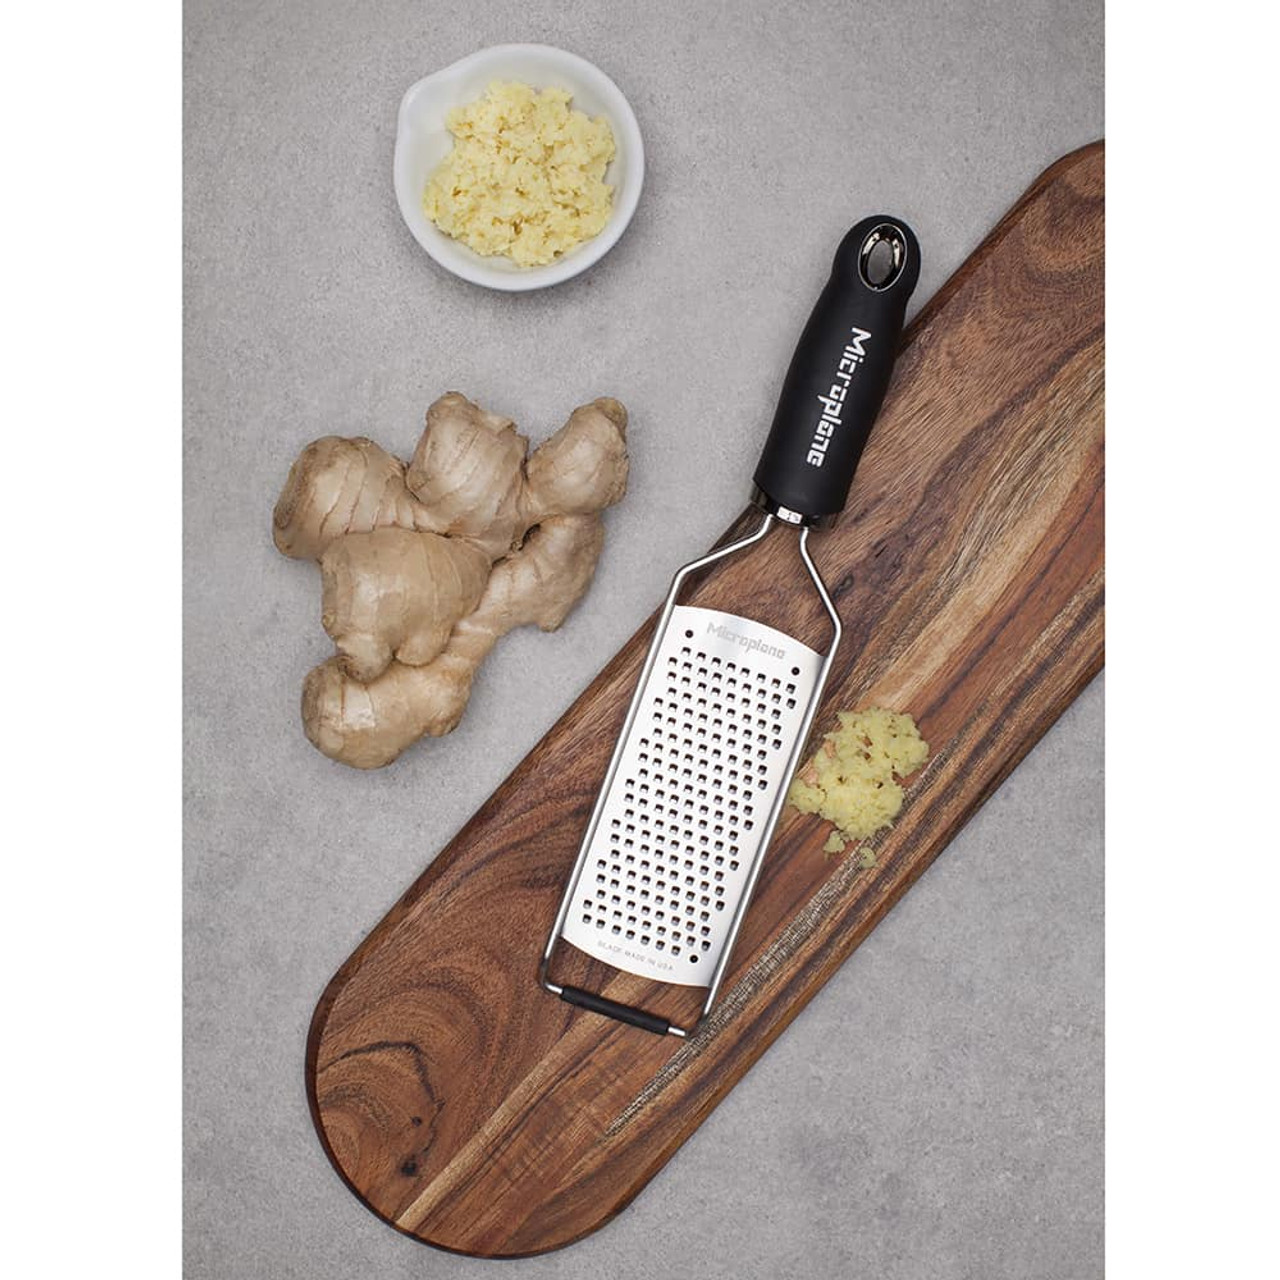 https://cdn11.bigcommerce.com/s-hccytny0od/images/stencil/1280x1280/products/1205/2811/microplane-gourmet-series-coarse-grater-2__91403.1588476027.JPG?c=2?imbypass=on